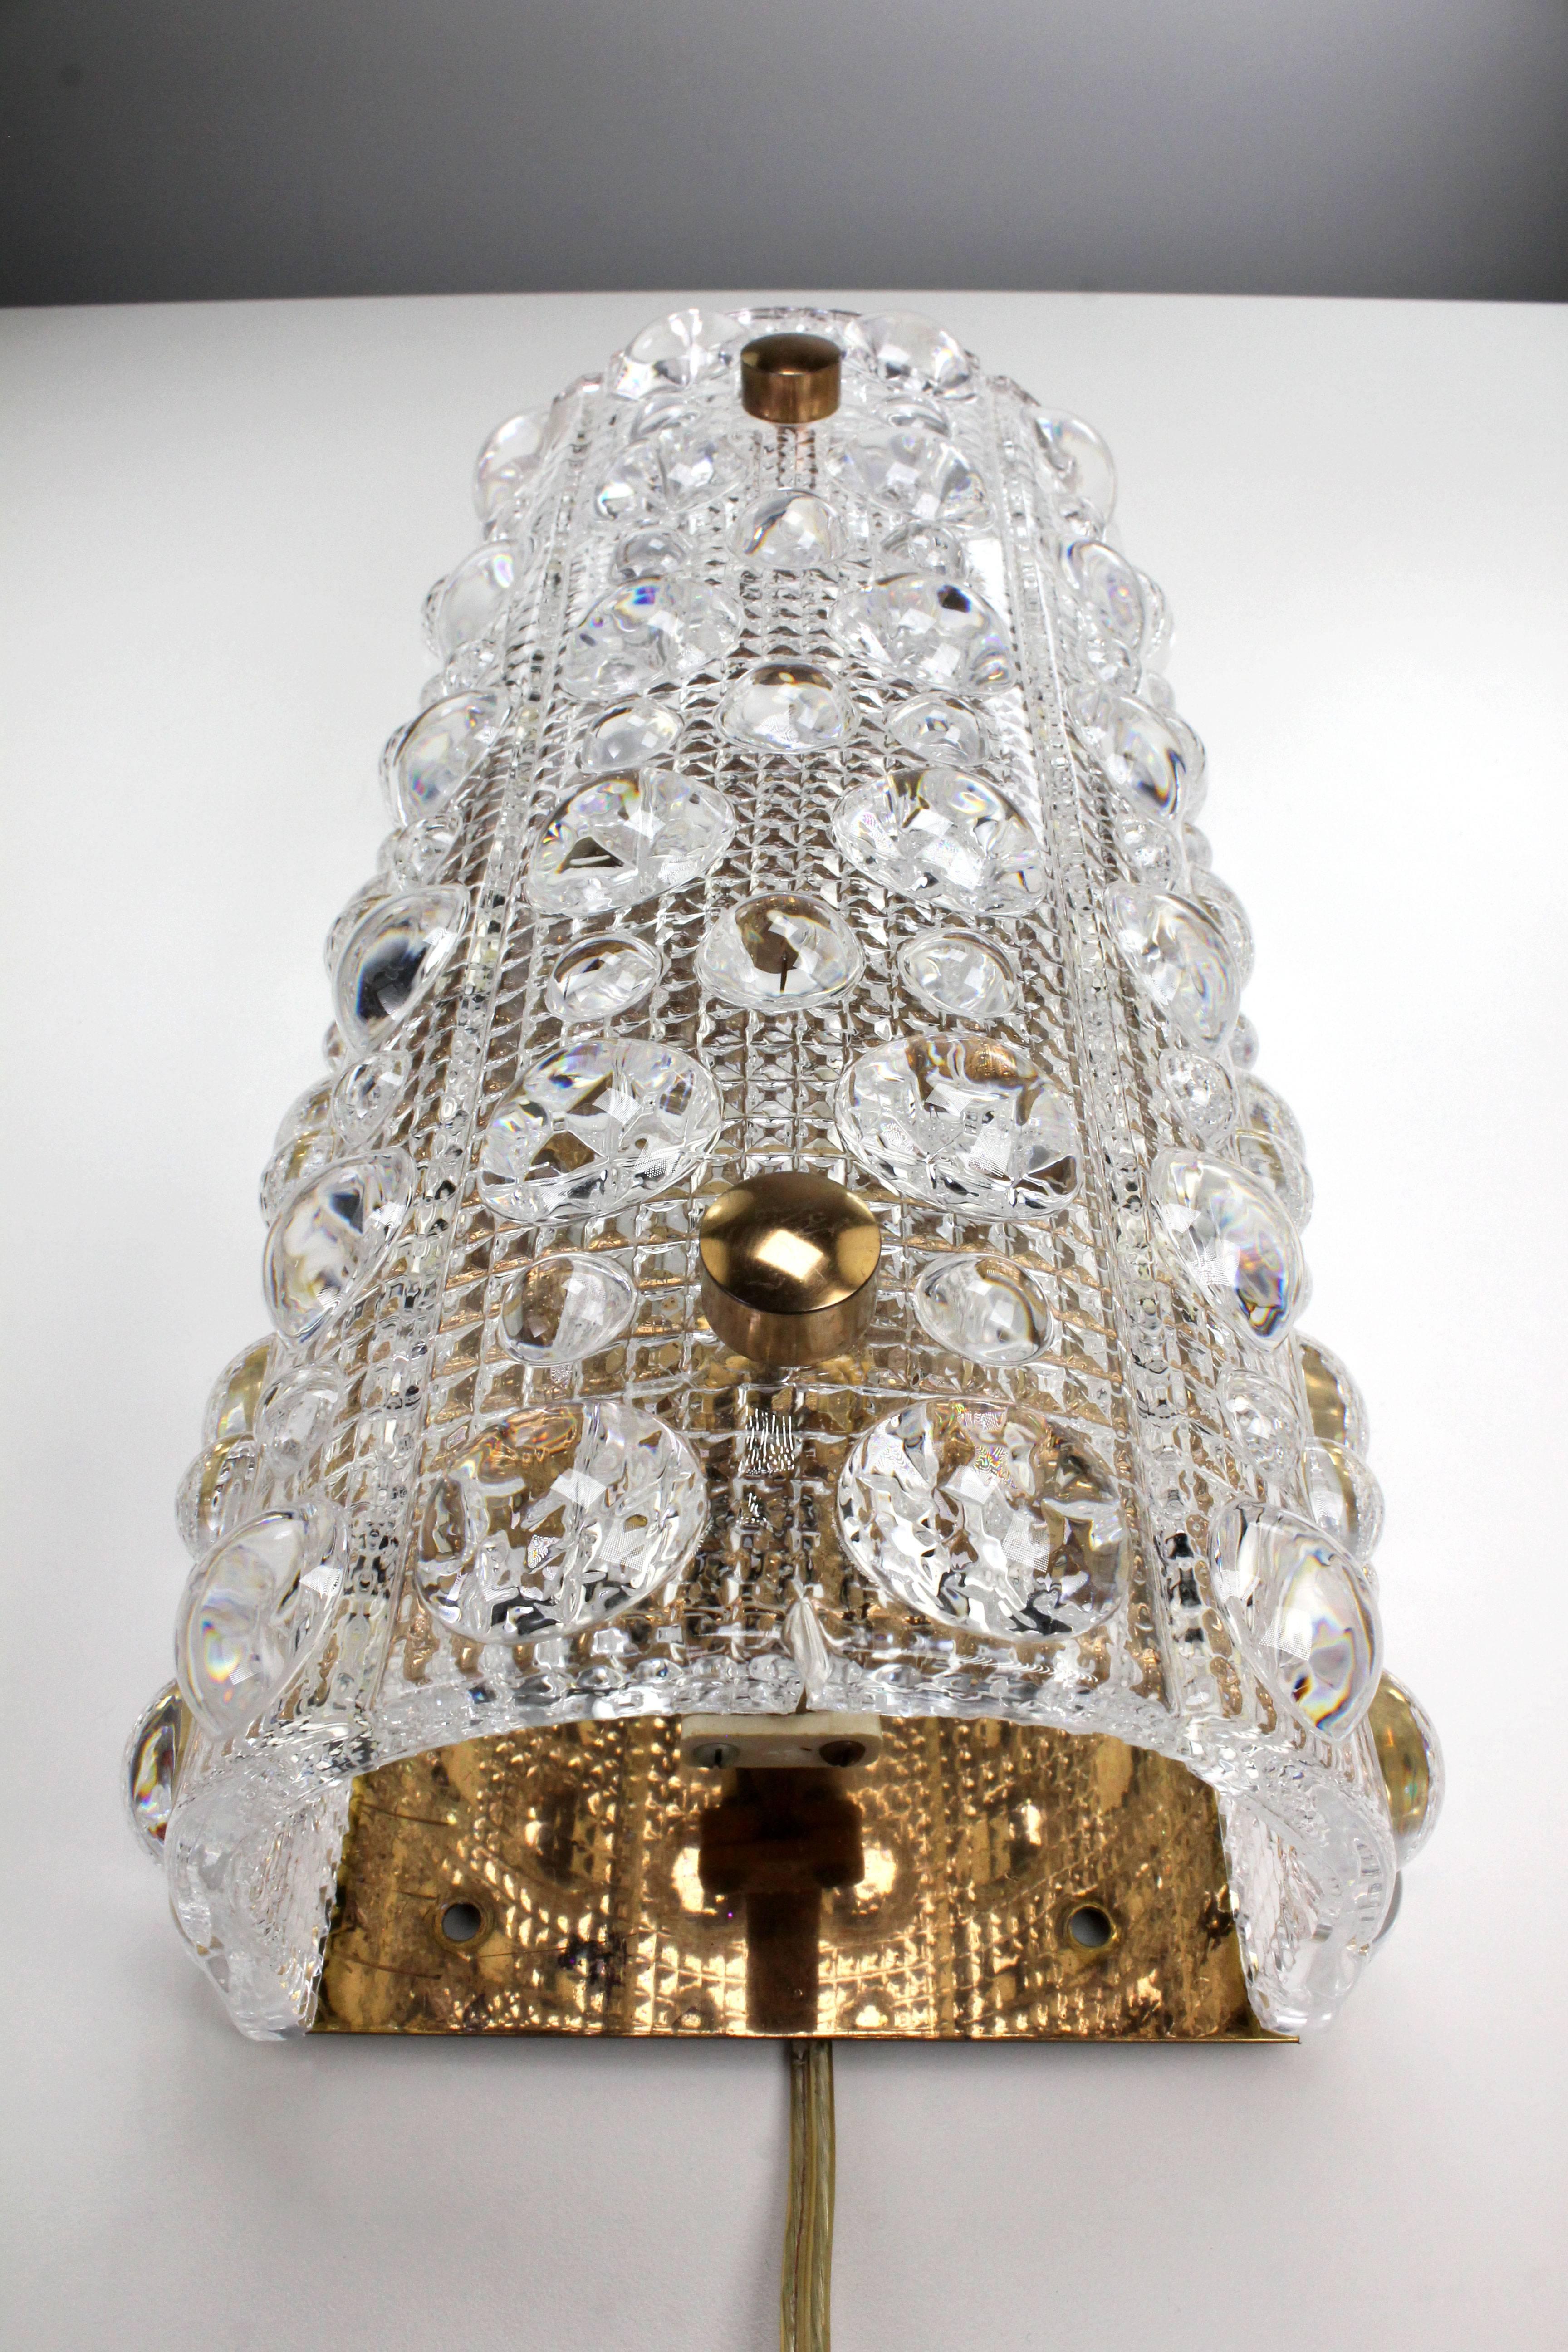 Stunning bubble textured crystal wall sconce by Swedish designer Carl Fagerlund for Orrefors Glasbruk. Manufactured in the small town of Orrefors in Sweden in the 1950s. Beautifully curved glass plate on brass mount with brass hardware. No chips or